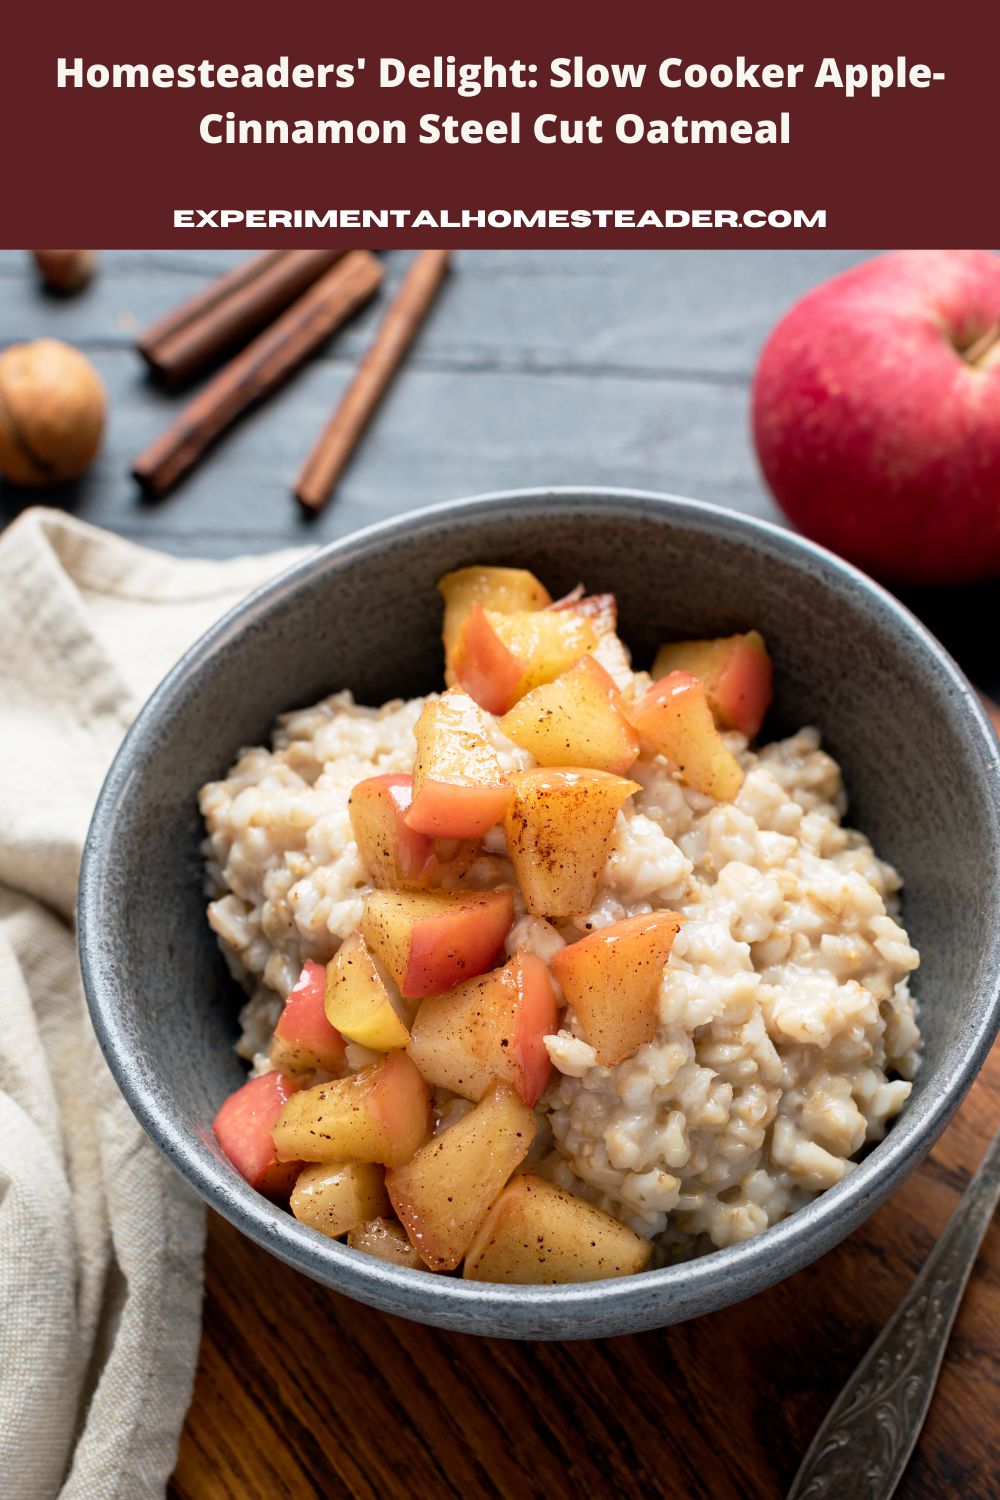 Diced apples sprinkled with cinnamon on top of oatmeal in a bowl.